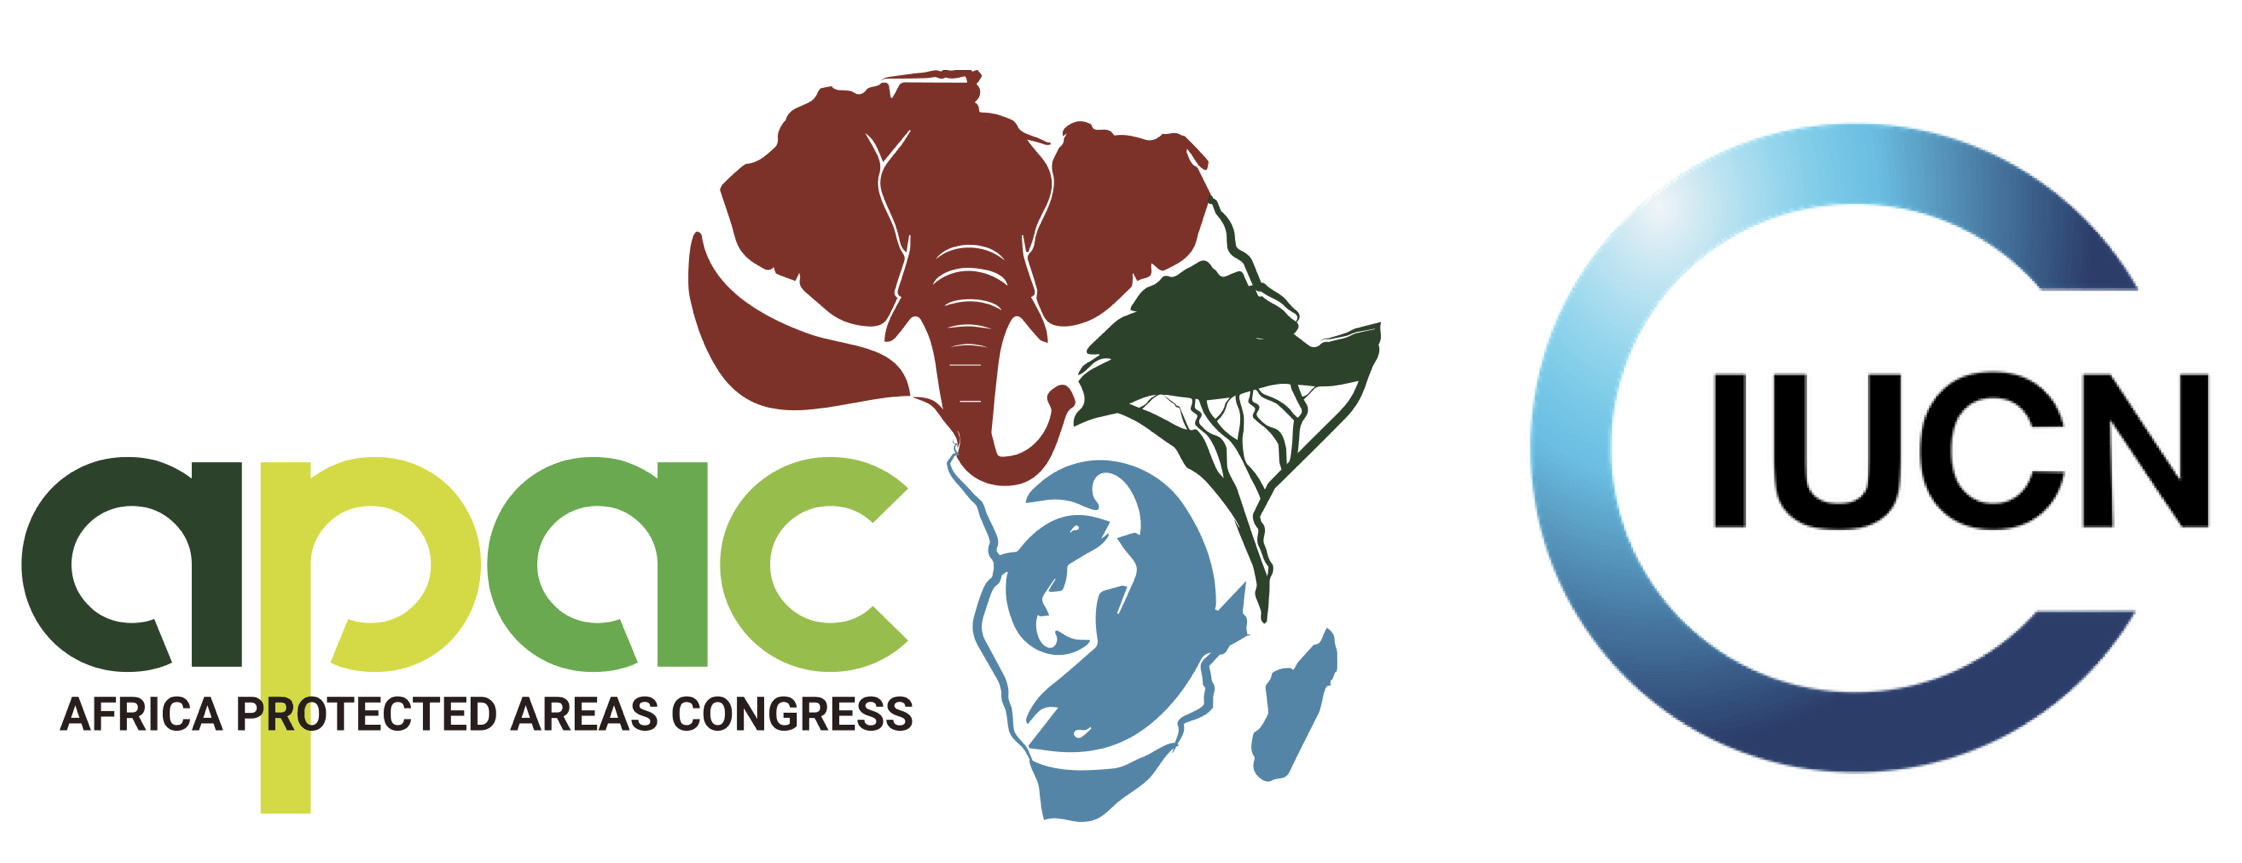 African Logo - Home - African Protected Areas Congress